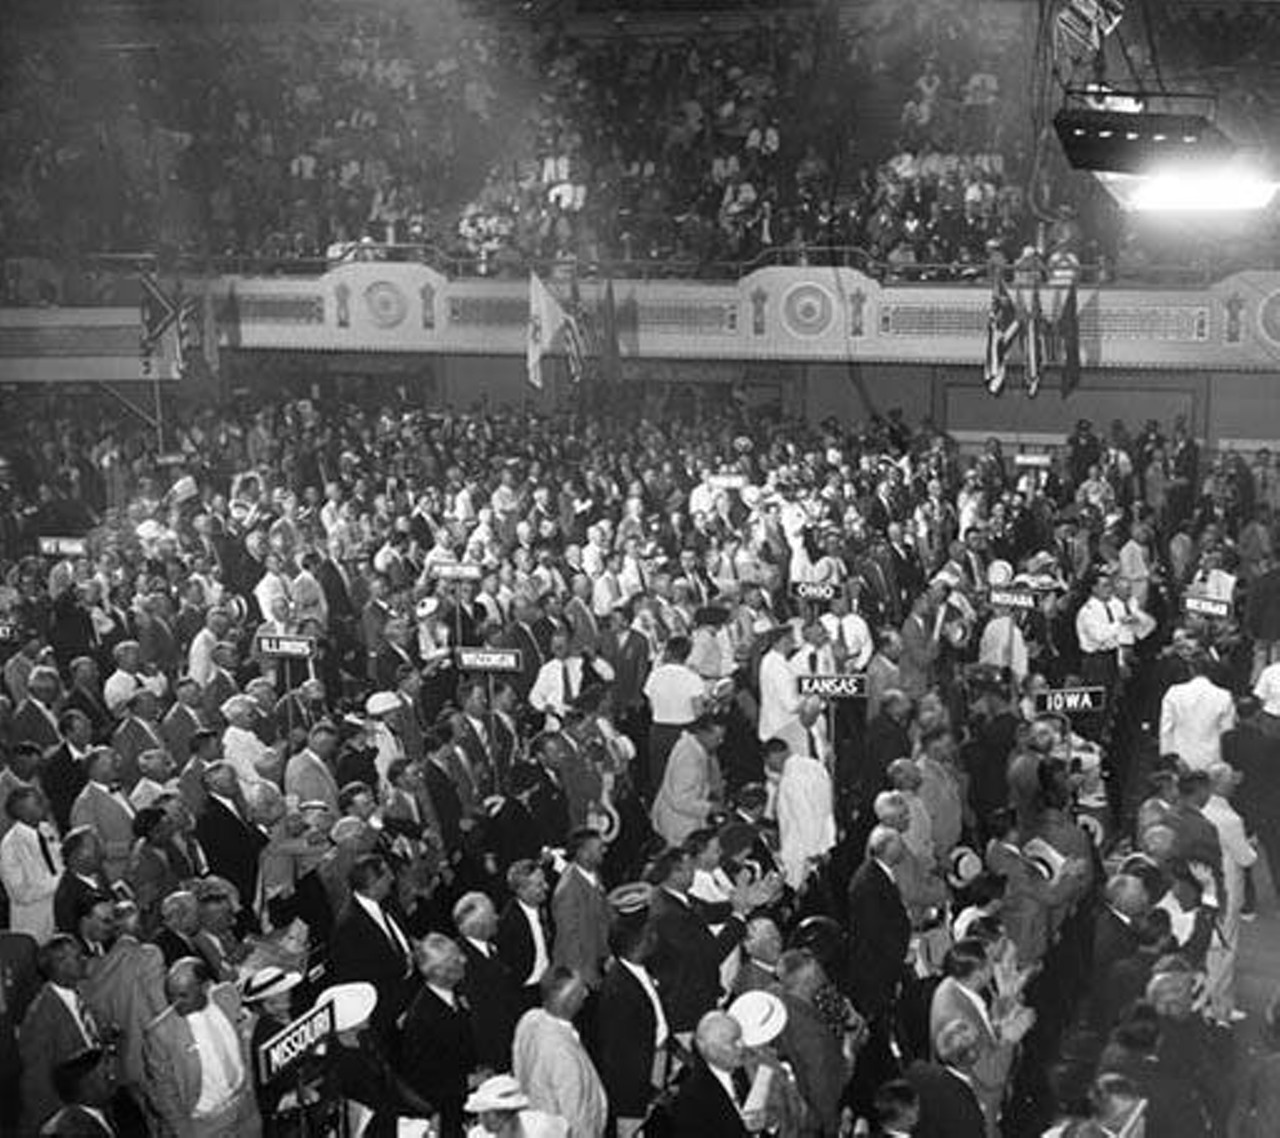 Crowds at Republican Party U. S. National Convention 1936